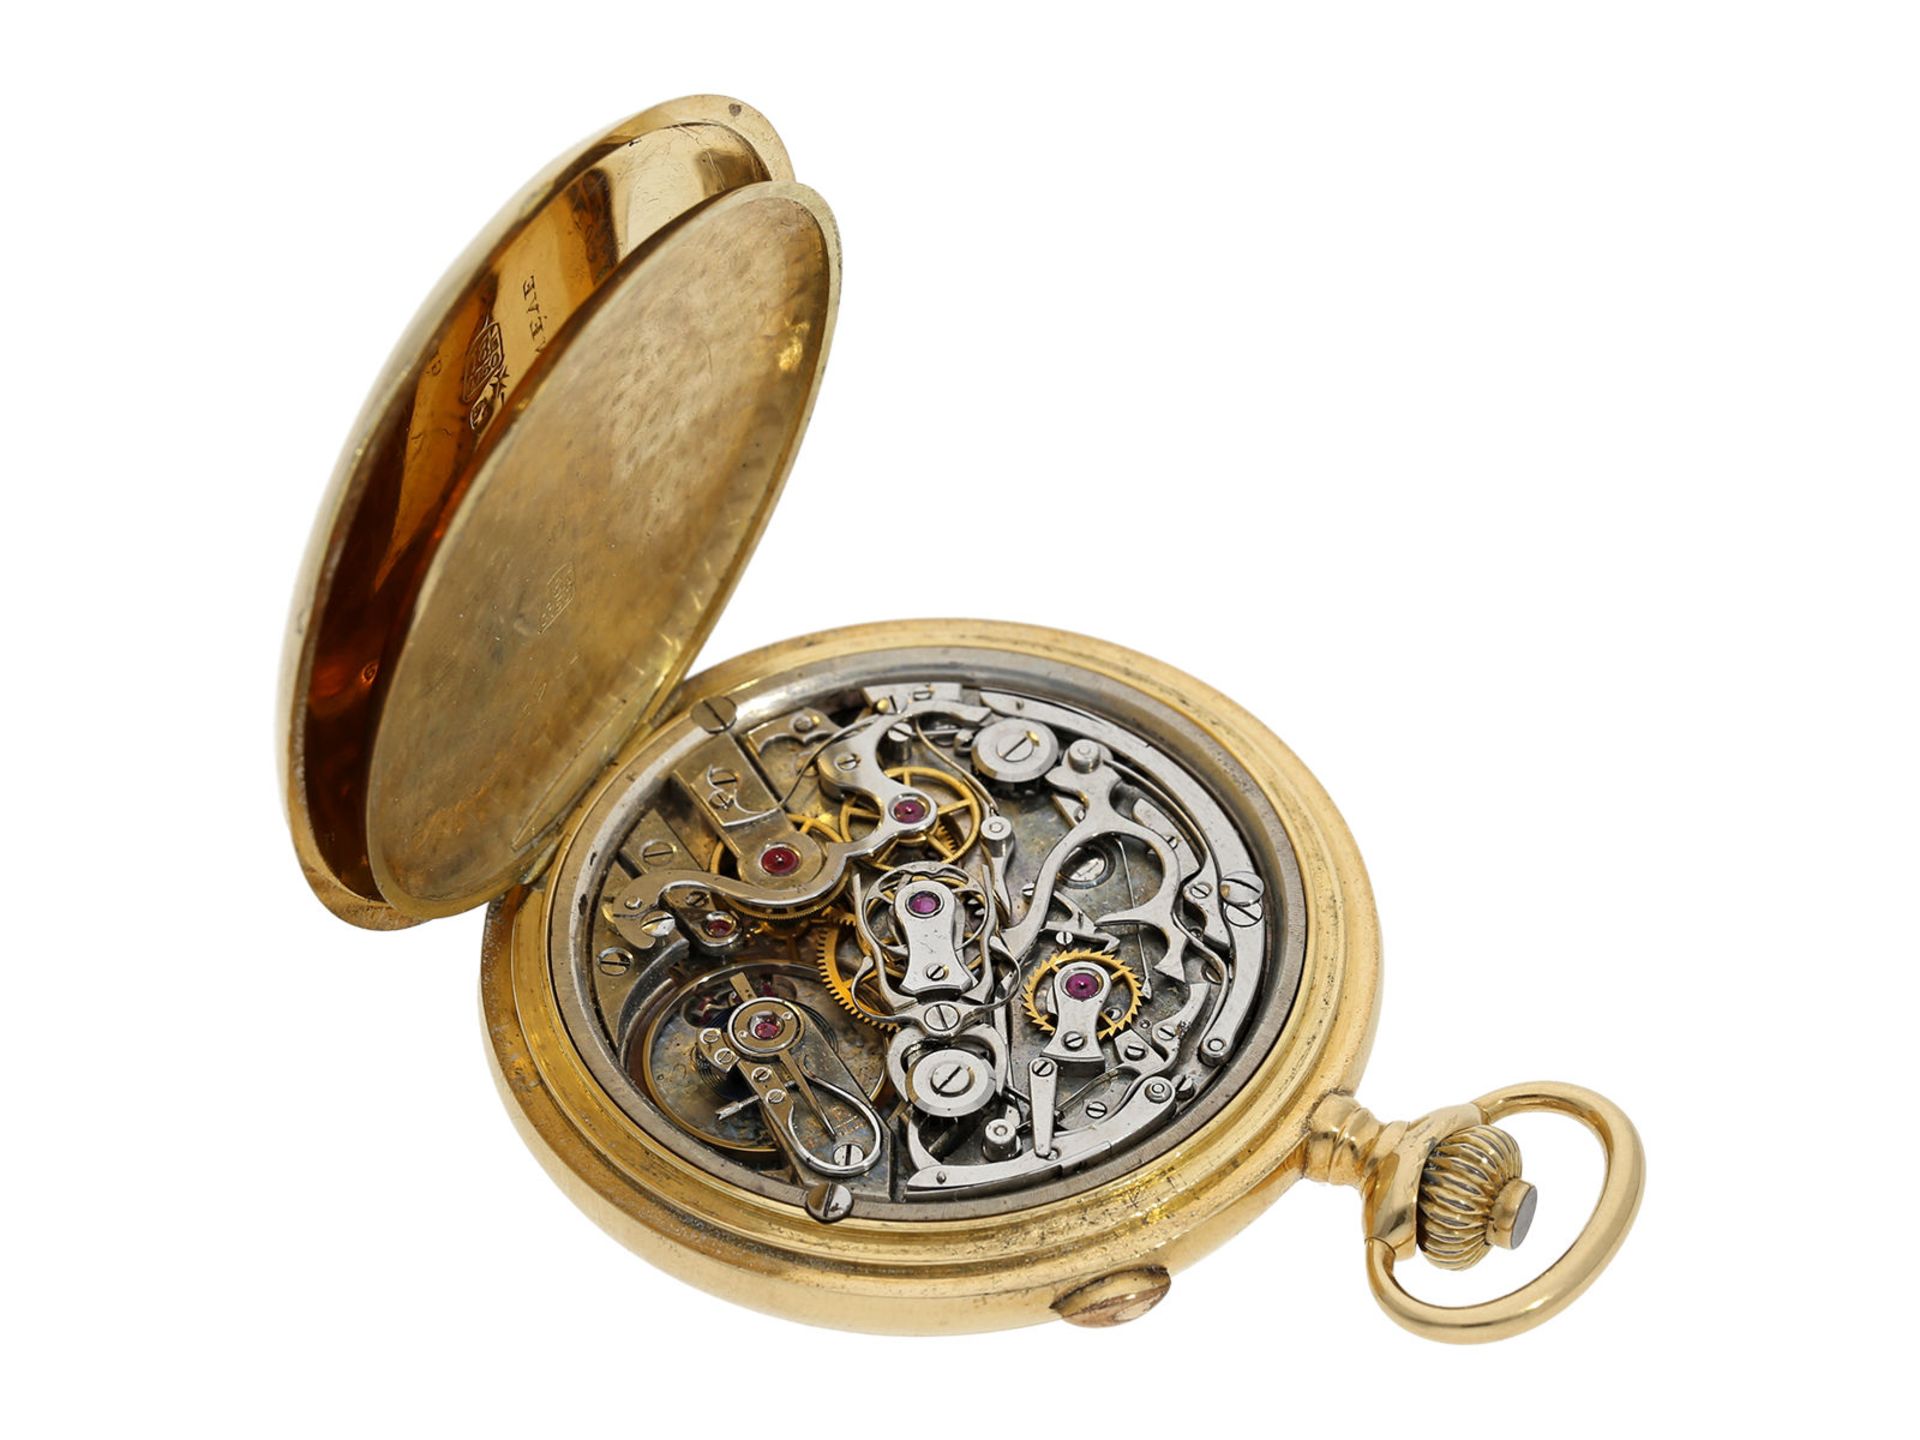 Pocket watch: extremely fine Vacheron & Constantin split-seconds chronograph with register, No. 1154 - Image 4 of 5